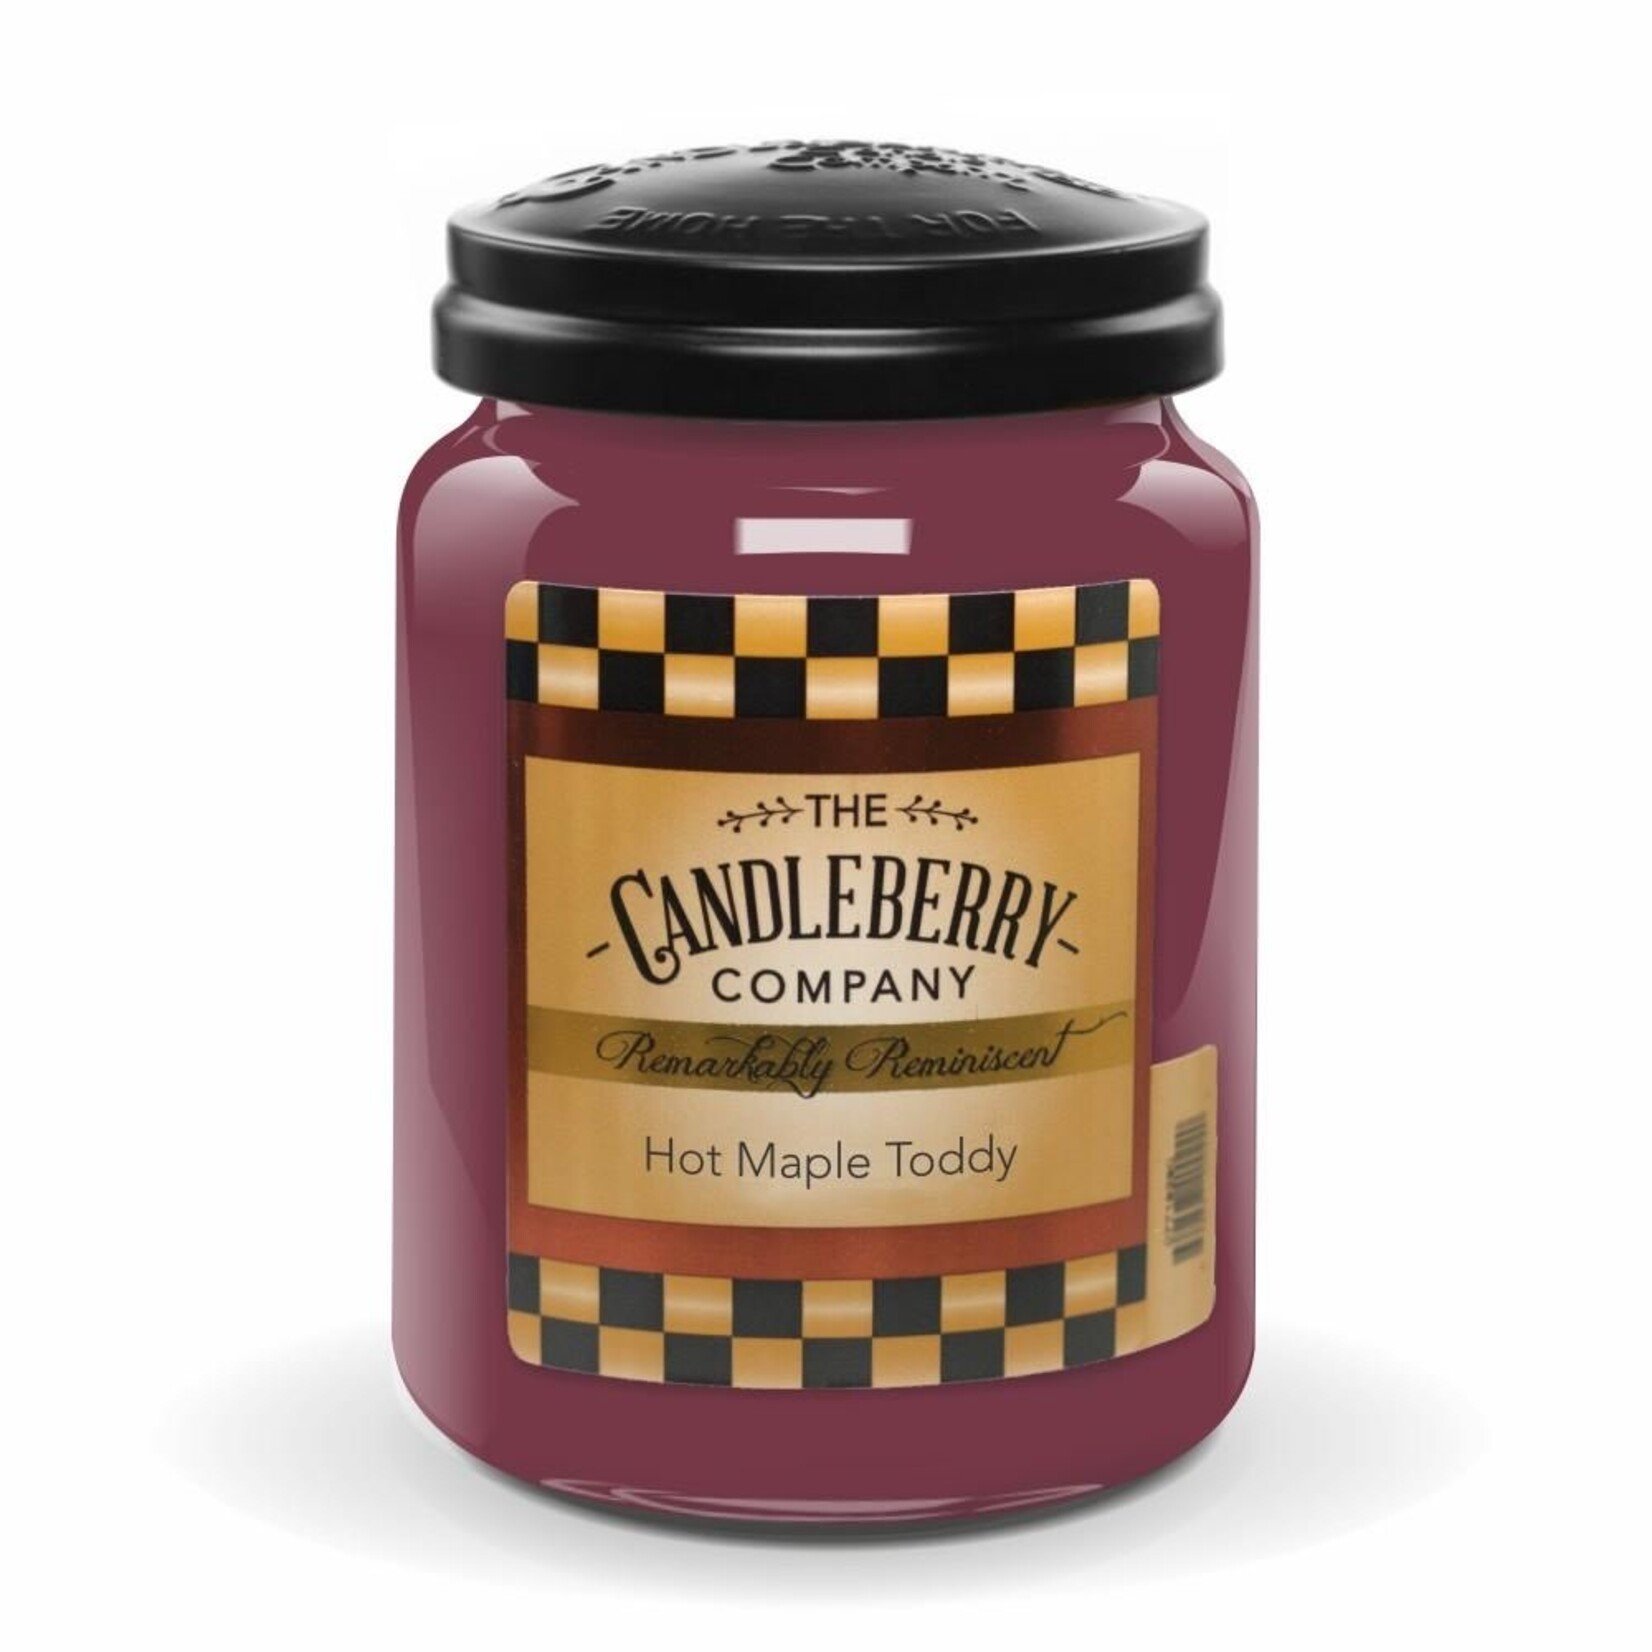 Candleberry Candleberry Hot Maple Toddy